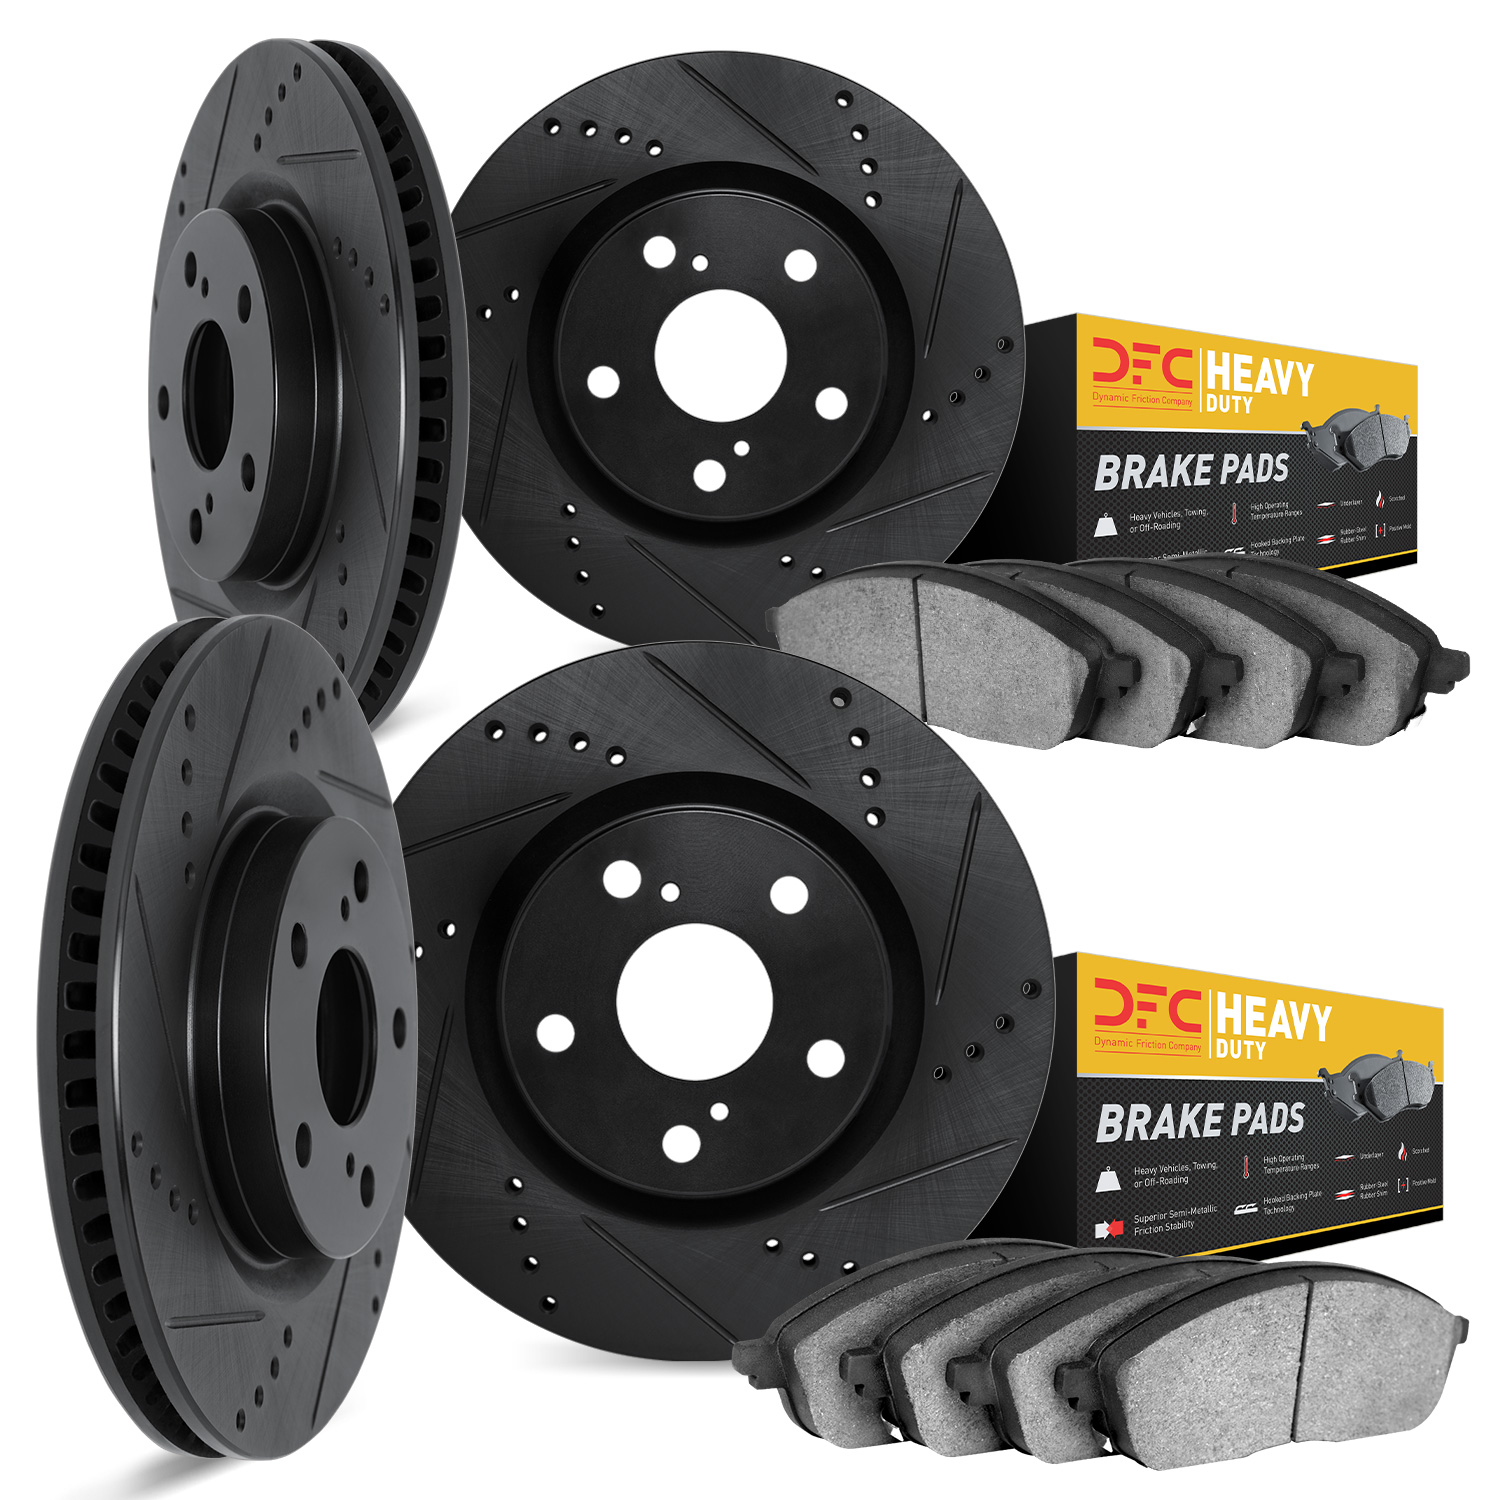 8204-55001 Drilled/Slotted Rotors w/Heavy-Duty Brake Pads Kit [Silver], 2003-2011 Ford/Lincoln/Mercury/Mazda, Position: Front an